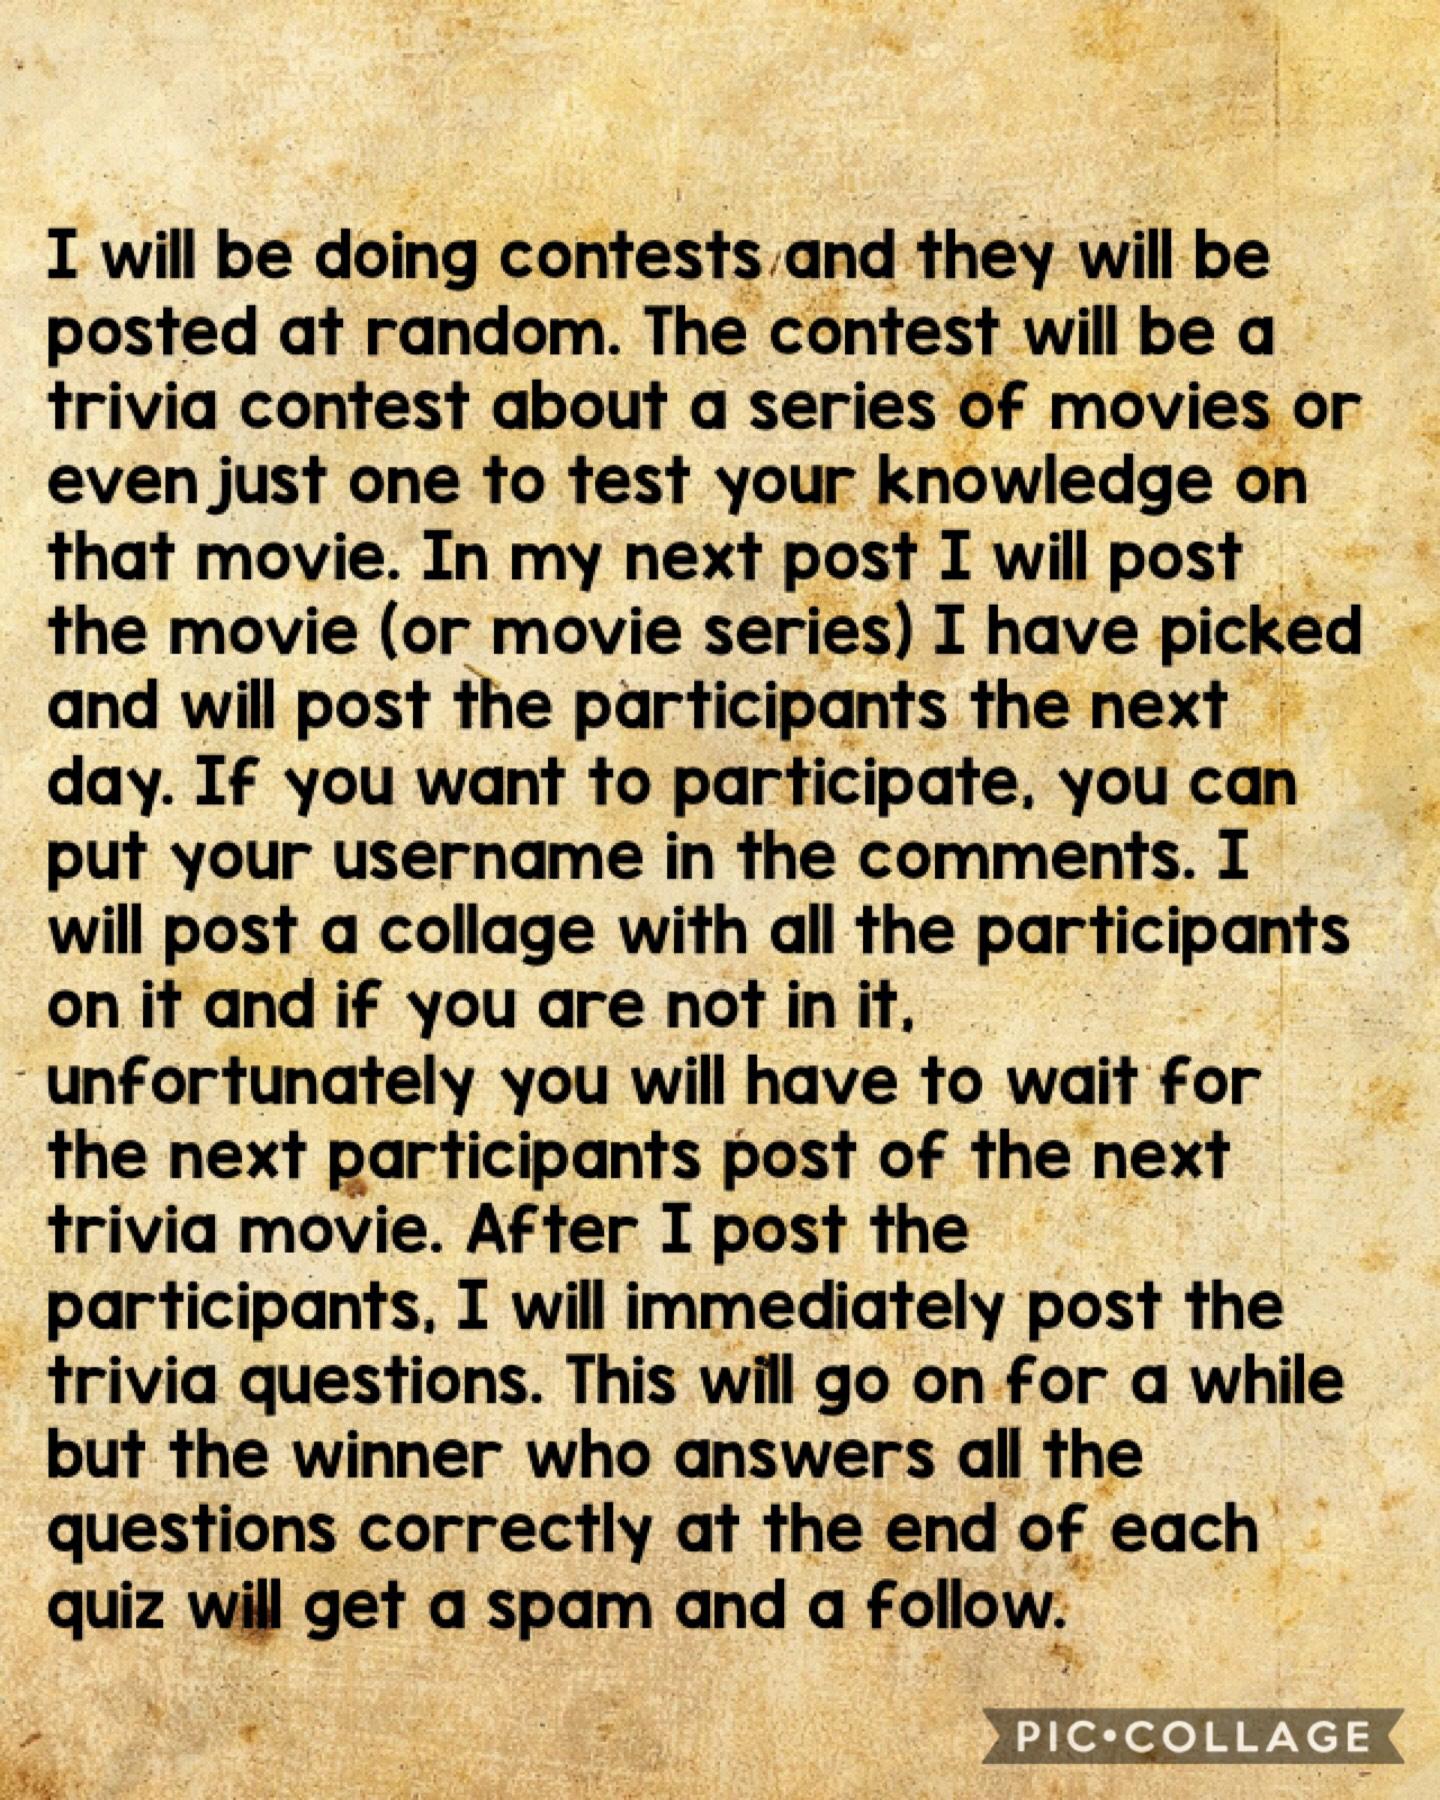 Participants please write username in comments. I will check all tomorrow and they will be posted along with the trivia movie and questions the same day!!! Good luck!!!